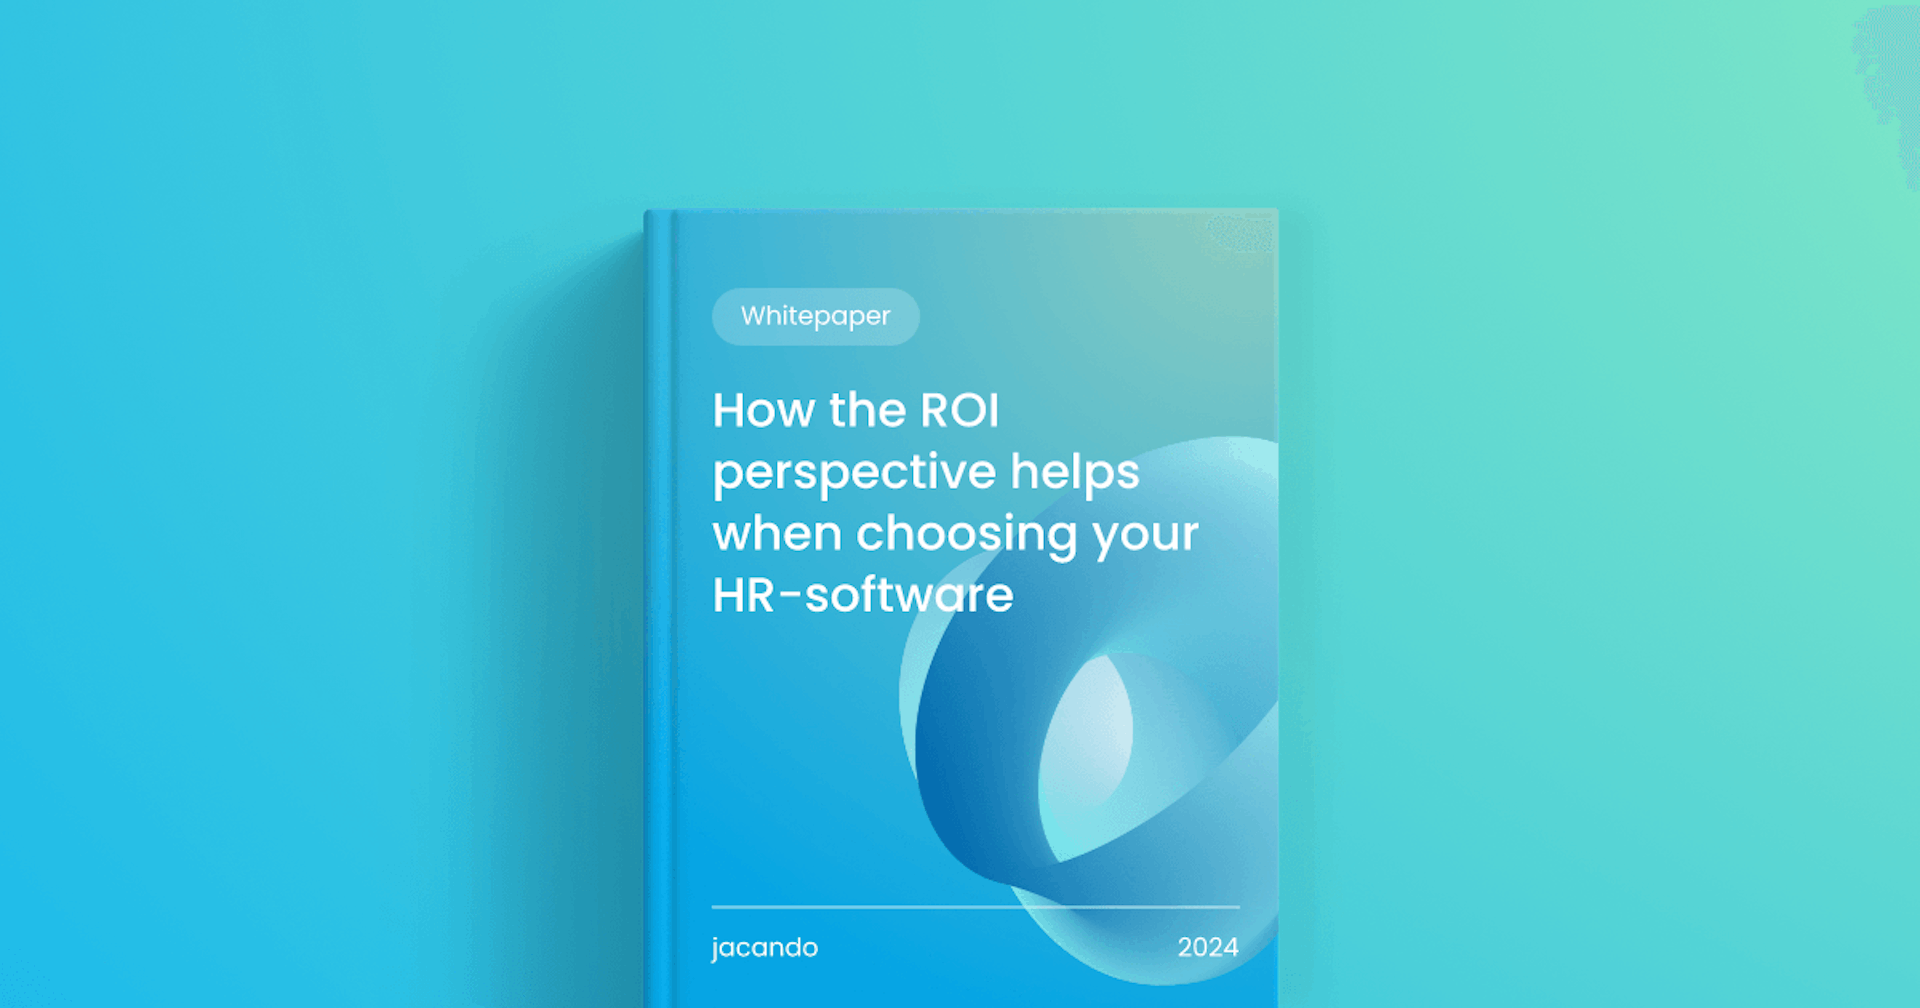 How the ROI perspective helps when choosing your HR-software